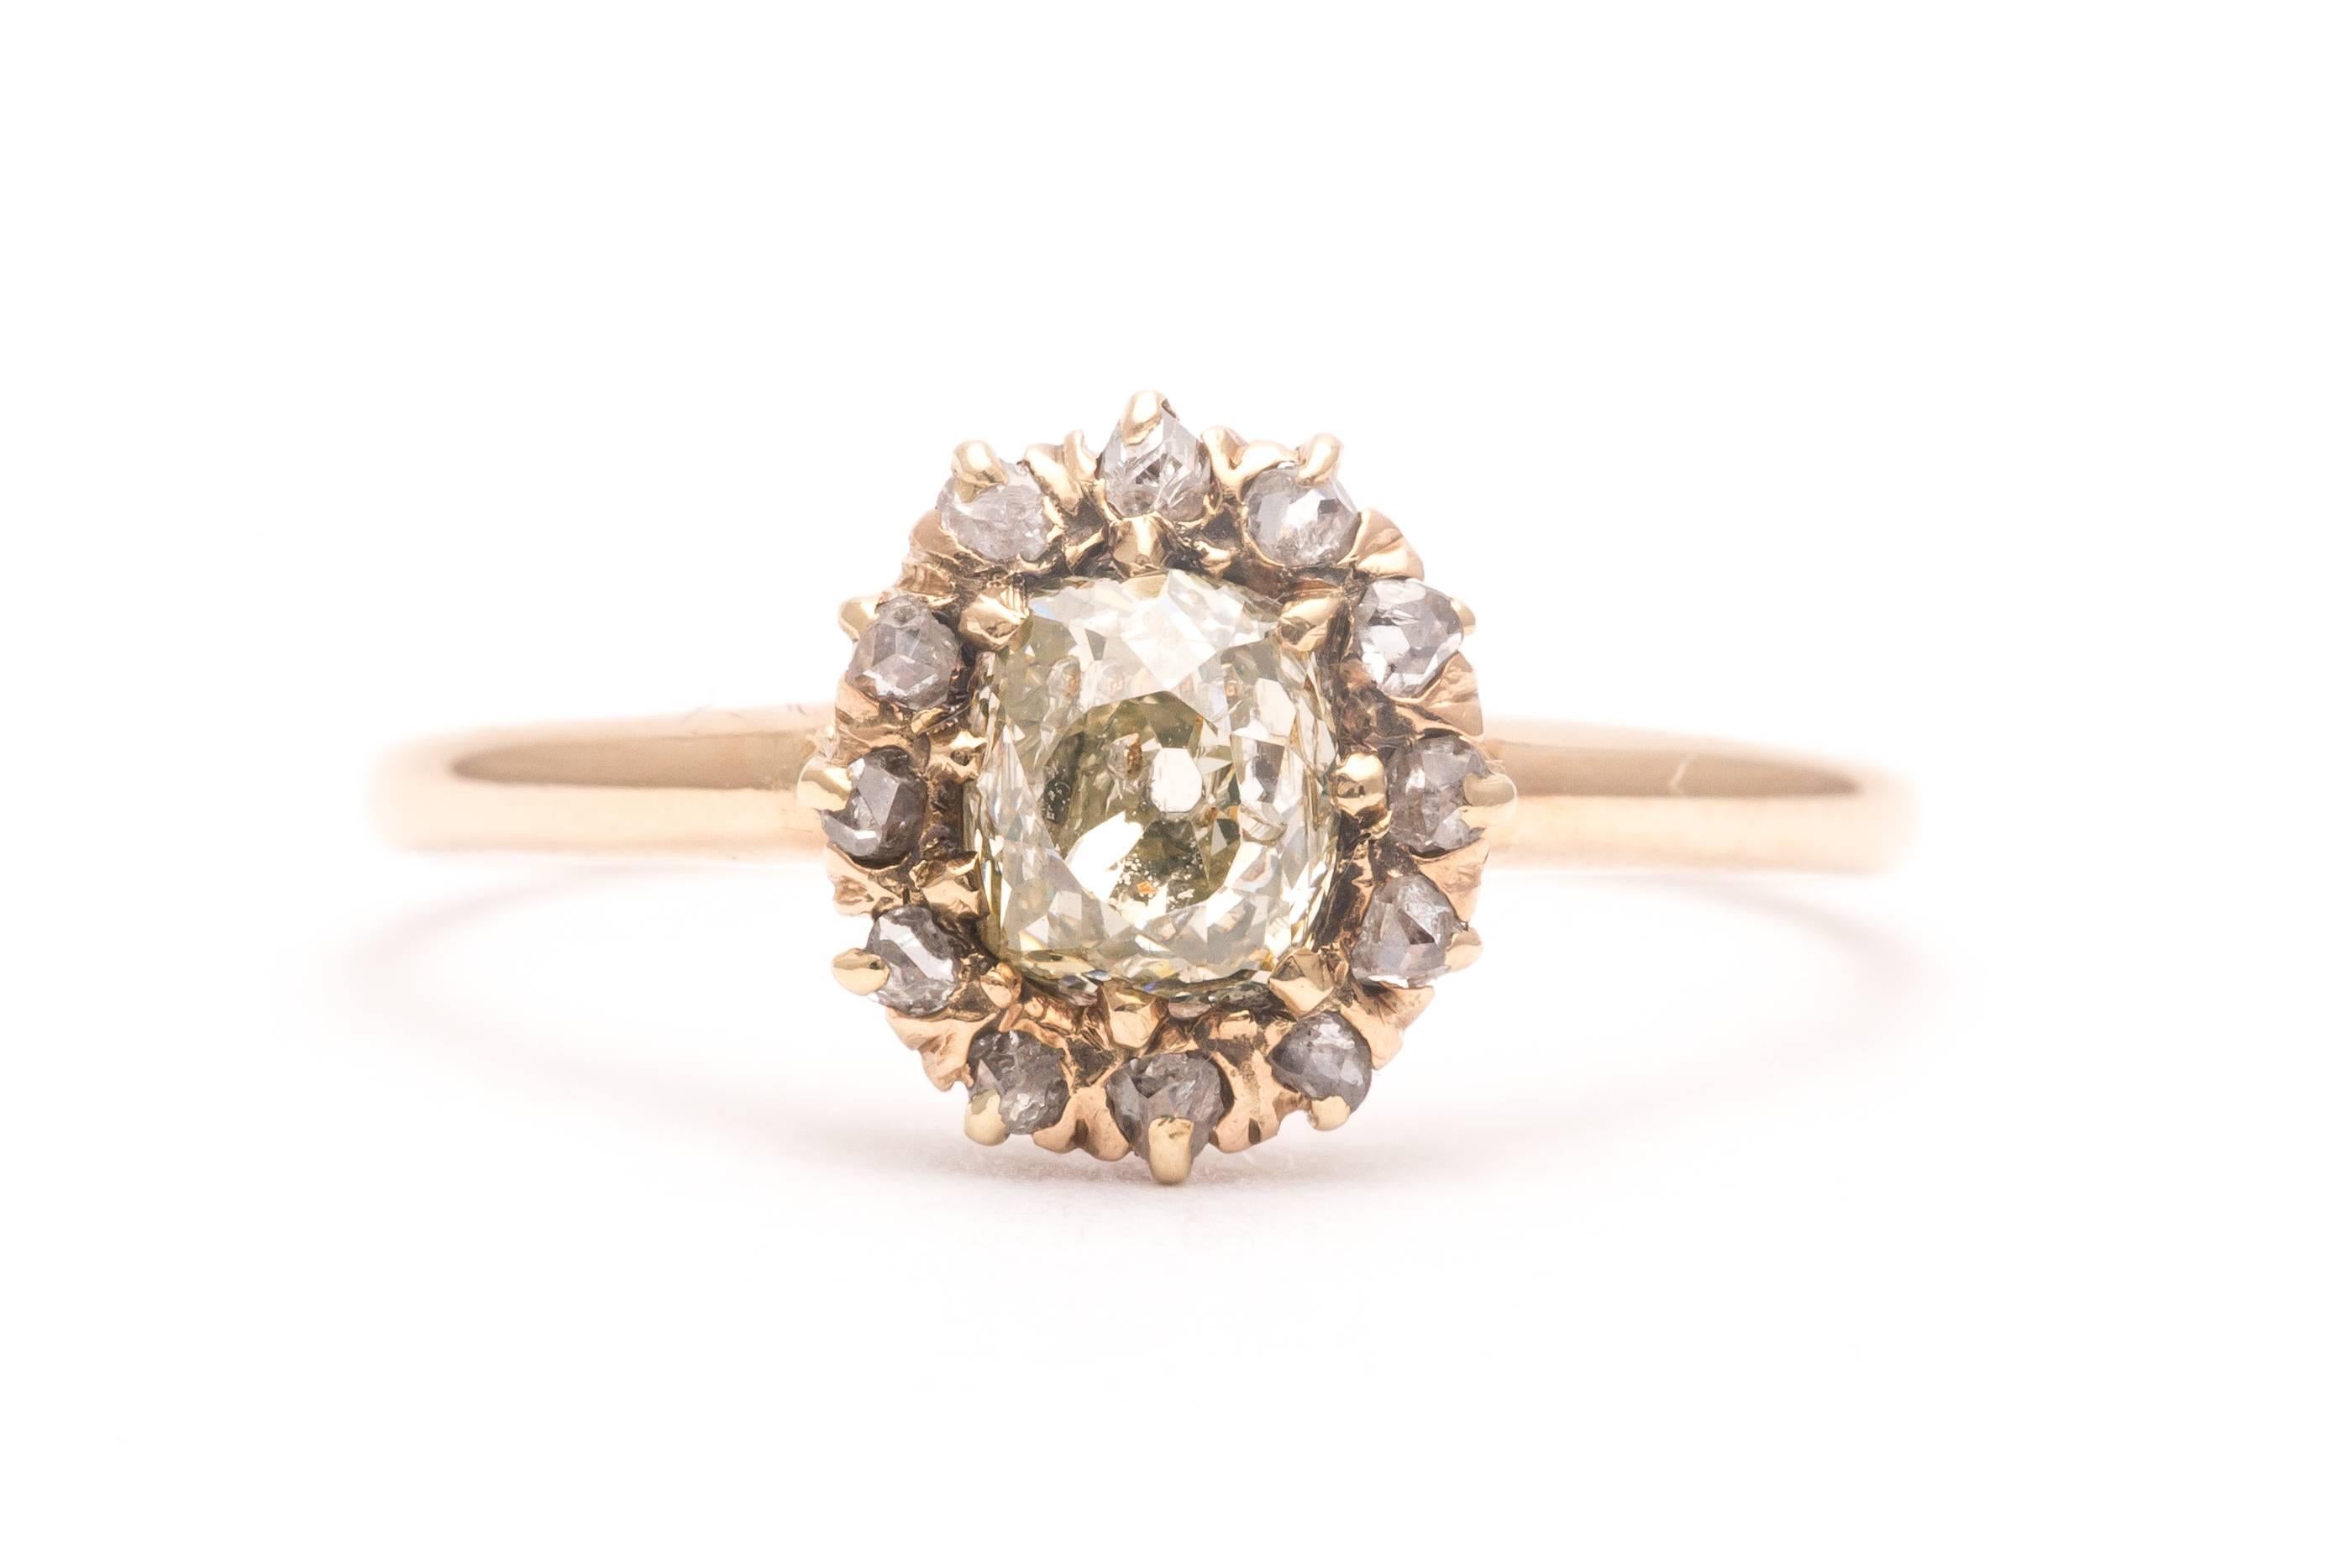 Beacon Hill Jewelers Presents:

An original antique georgian period diamond engagement ring in yellow gold.  Centered by a cushion shaped mine cut diamond, this ring boasts a halo of twelve rose cut diamonds encircling the center diamond.

Weighing